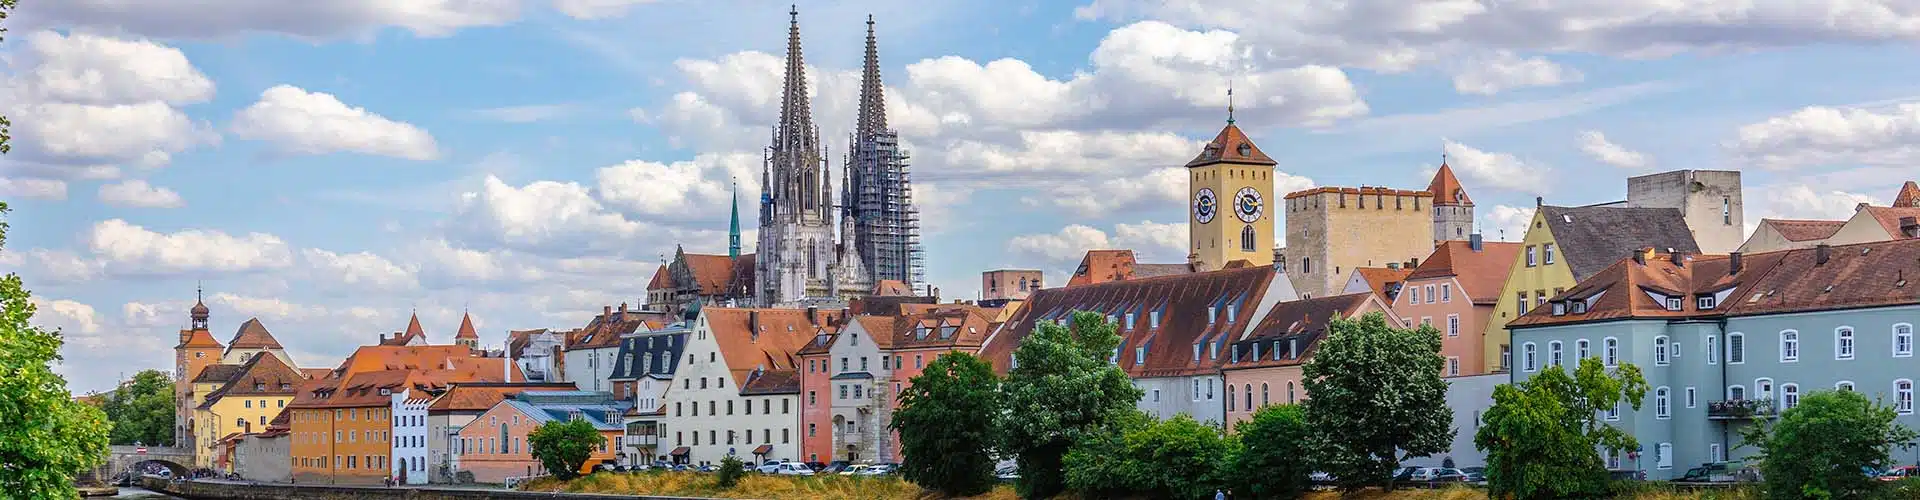 panoramic view of regensburg st peters cathedral and bridge tower